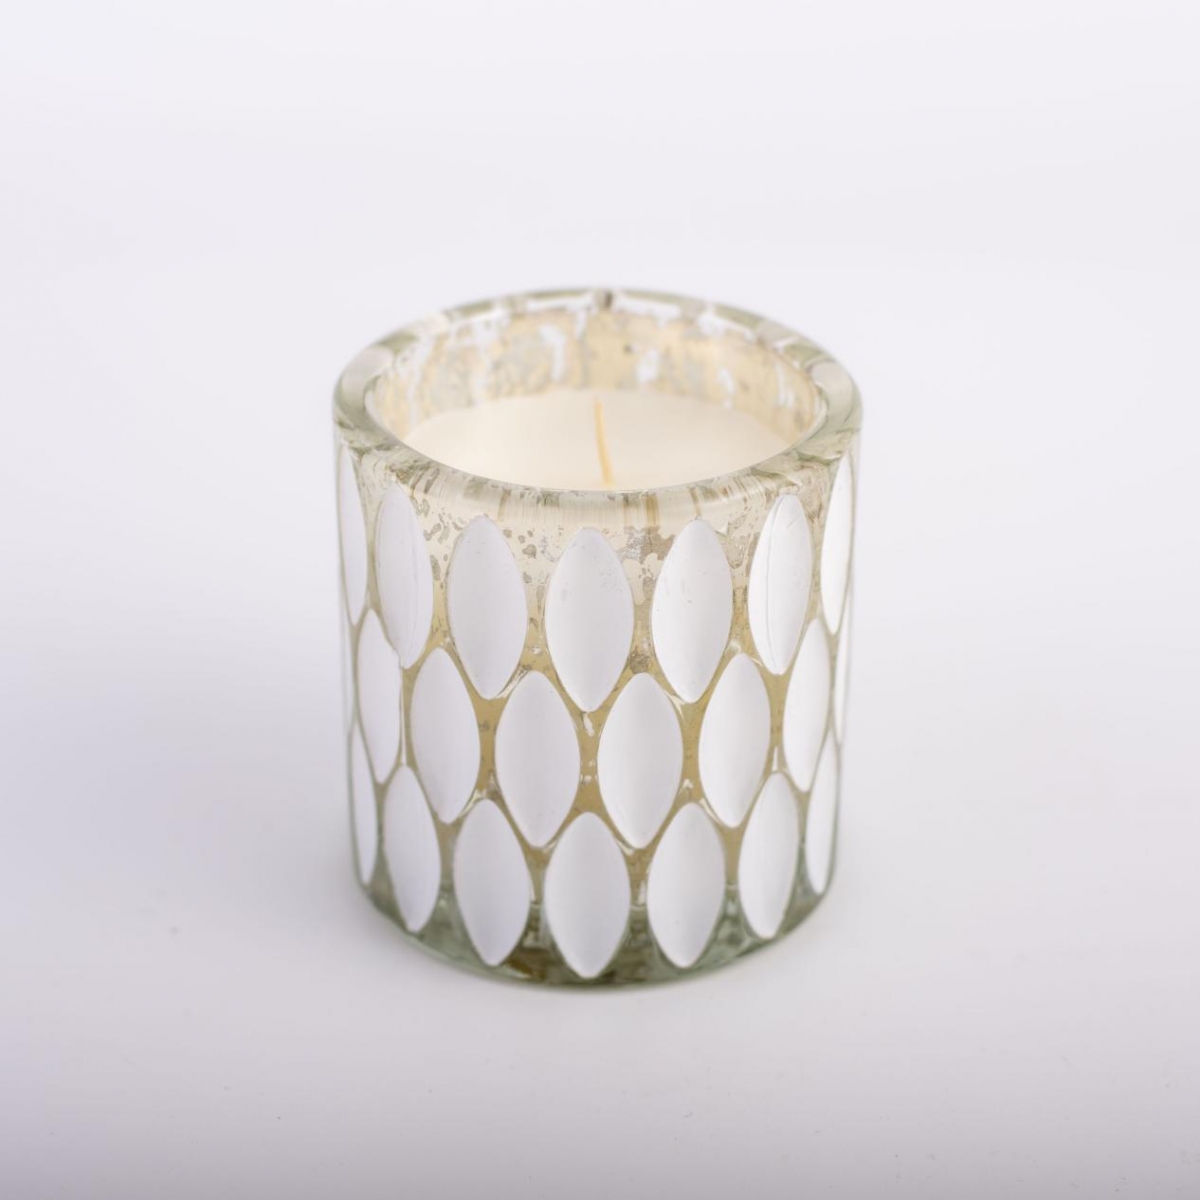 Soy Candles -Natural Essential Oils ,Scented Candles In White Glass Jar ,Polishing Geometric Leaf  ,Aromatherapy Candles ,China Factory ,Price-HOWCANDLE-Candles,Scented Candles,Aromatherapy Candles,Soy Candles,Vegan Candles,Jar Candles,Pillar Candles,Candle Gift Sets,Essential Oils,Reed Diffuser,Candle Holder,